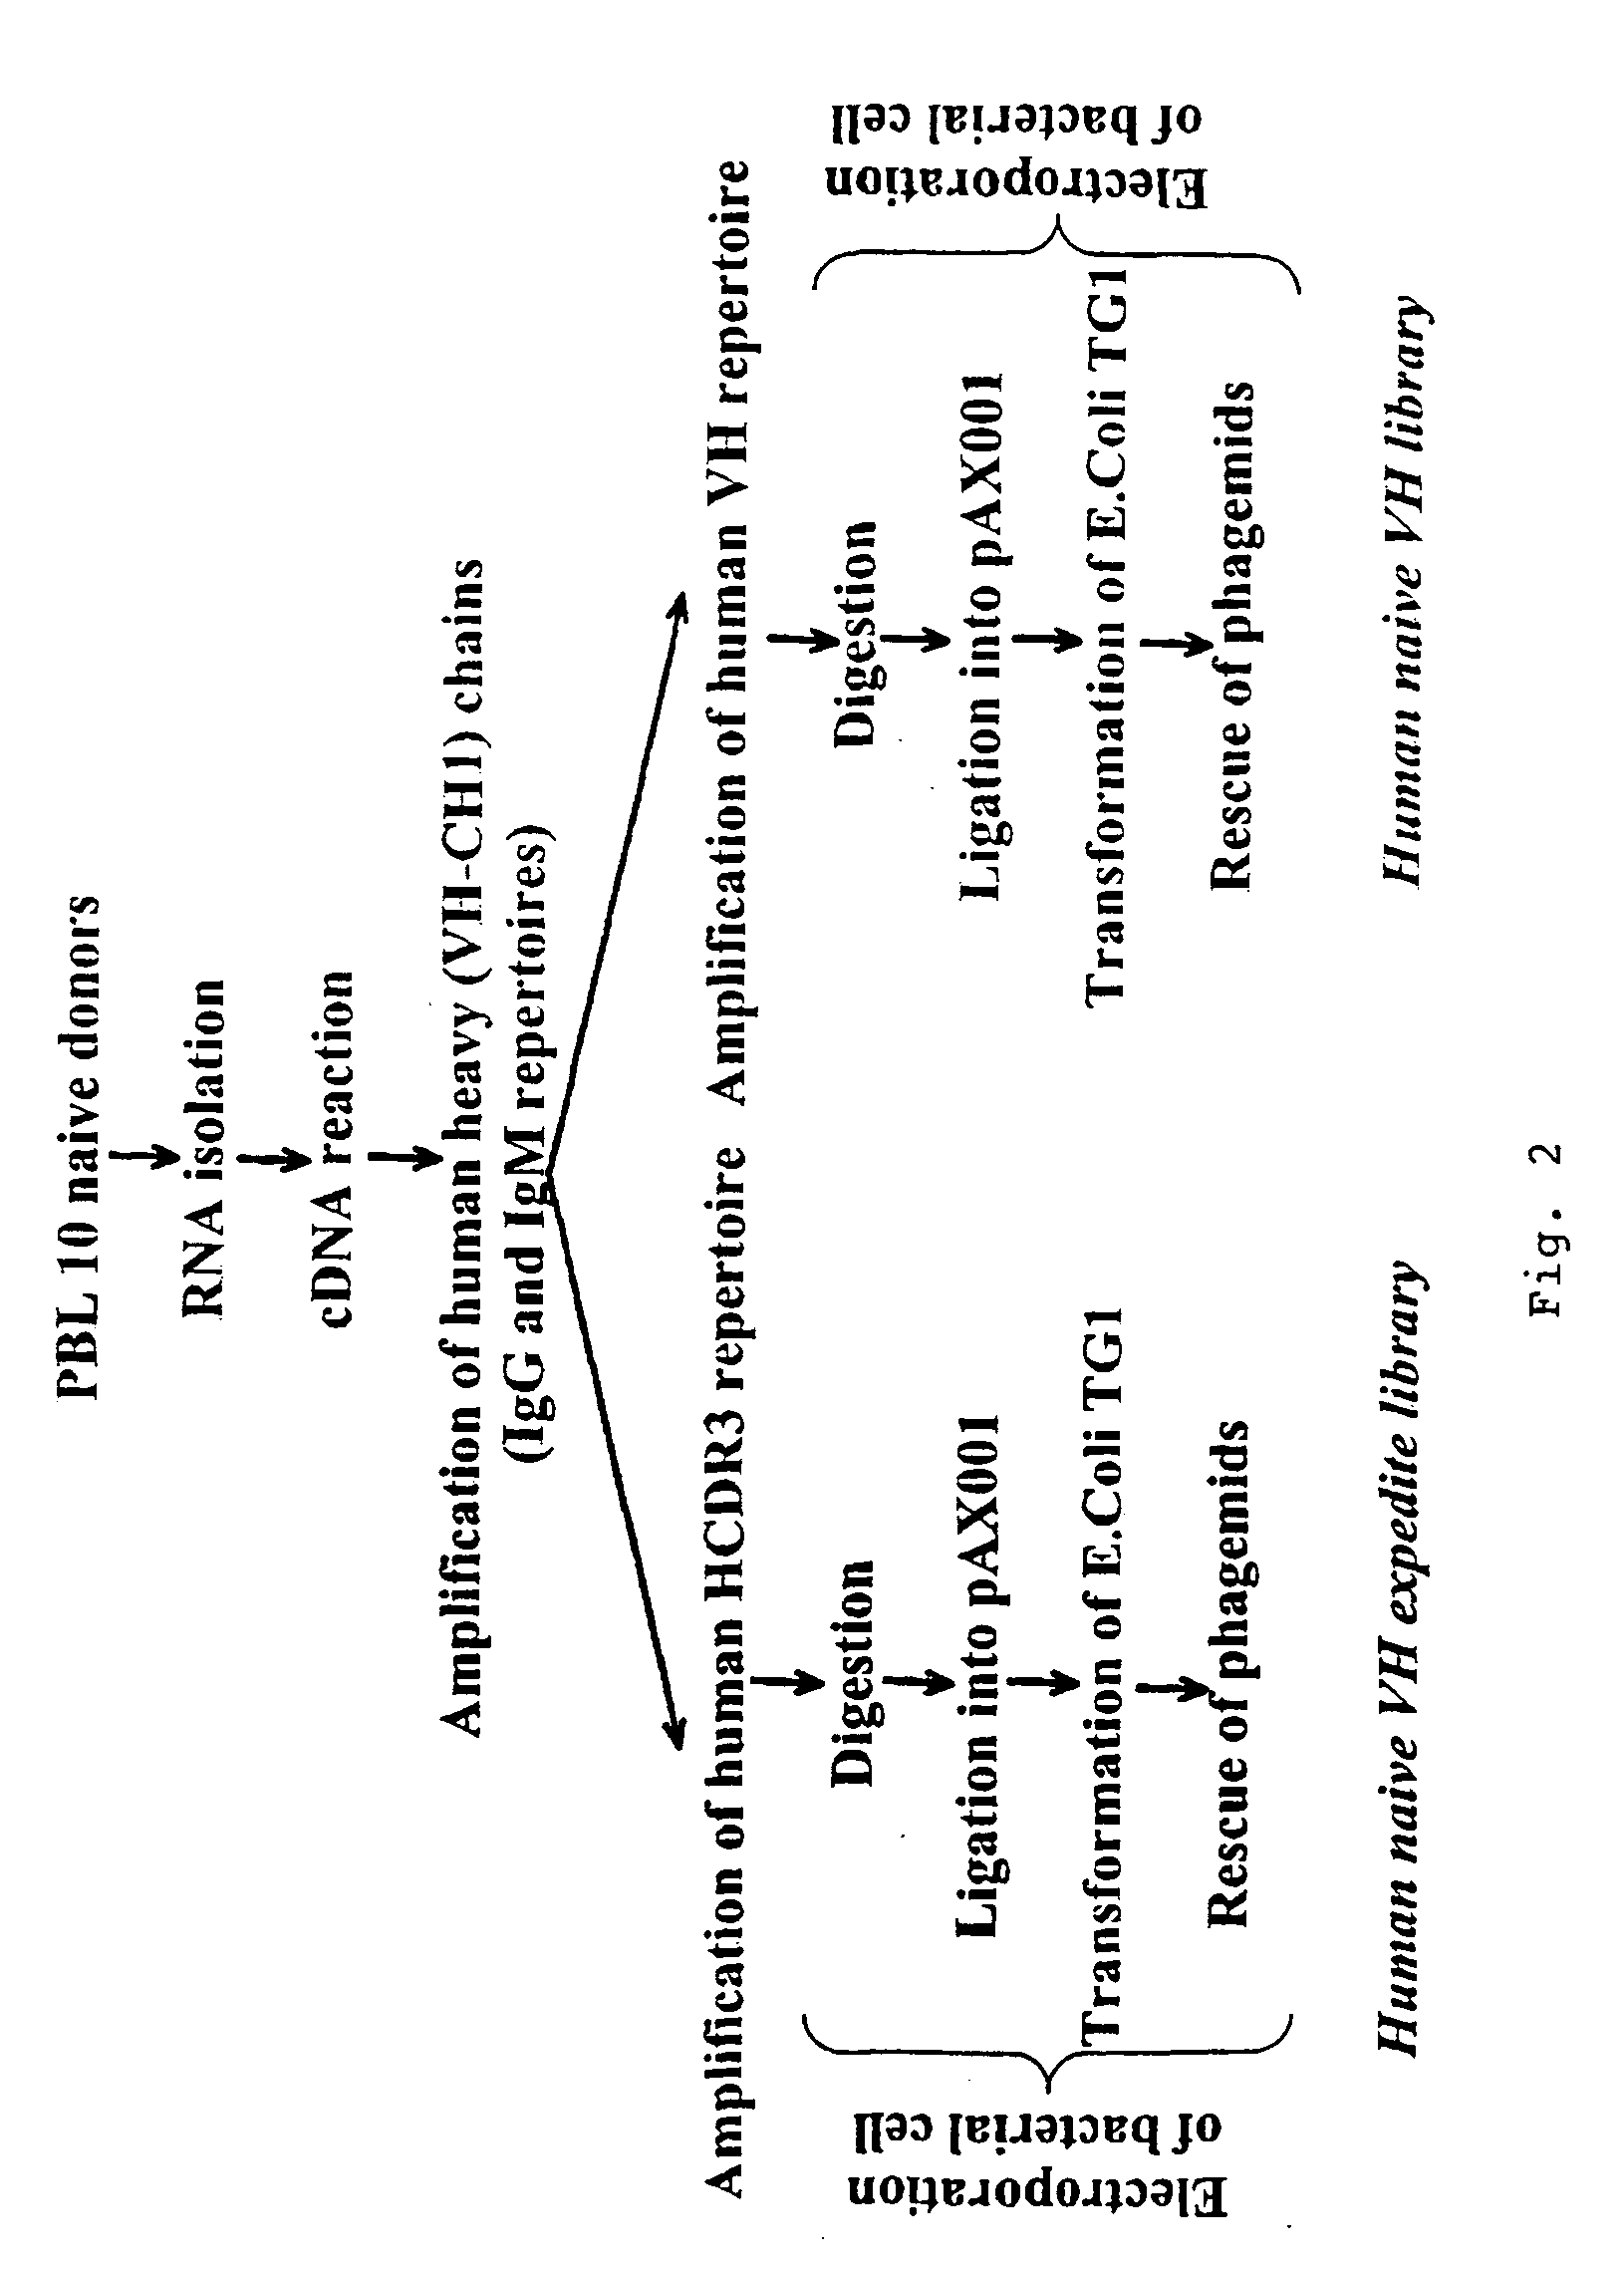 Method for displaying loops from immunoglobulin domains in different contexts